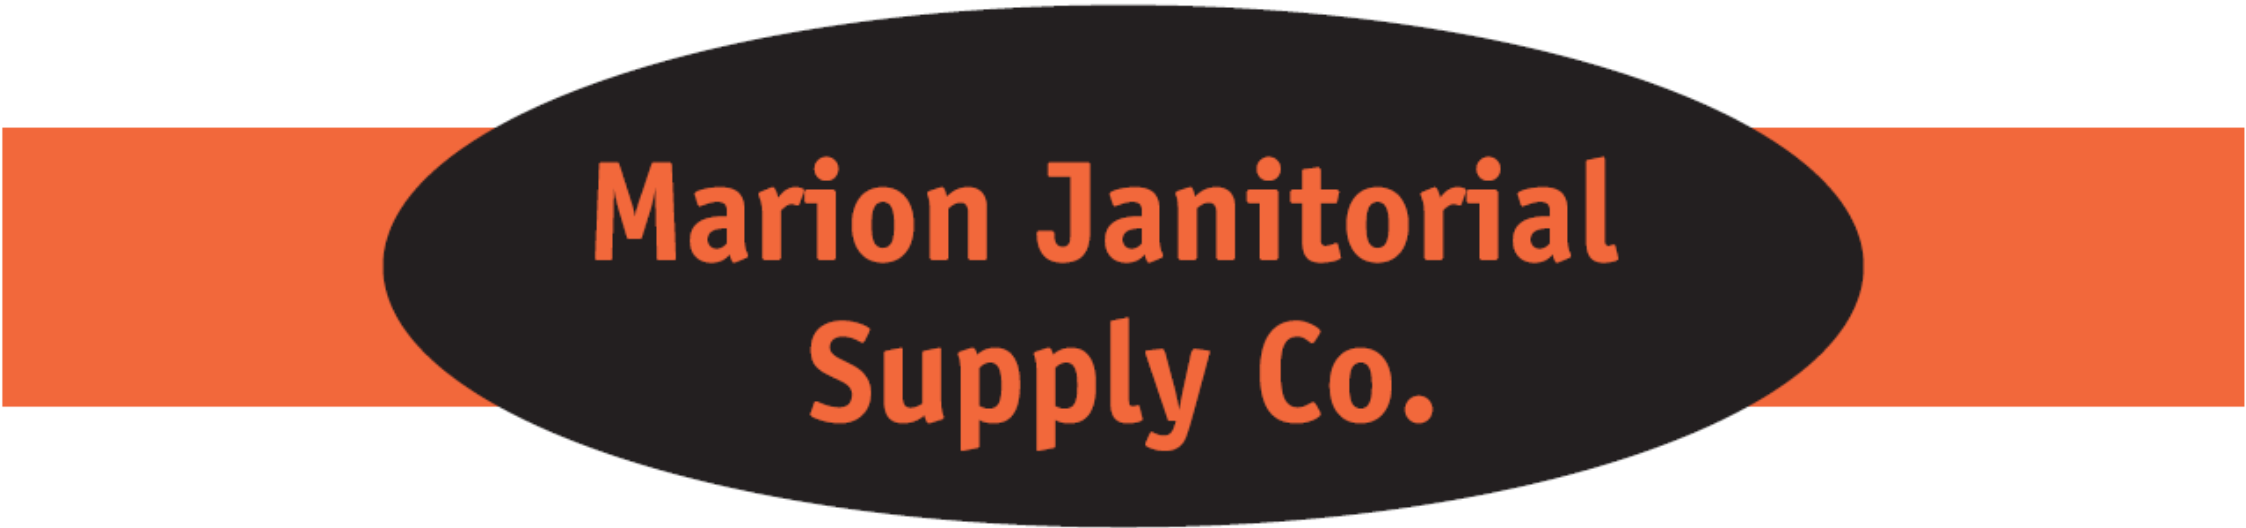 Marion Janitorial Supply Co.